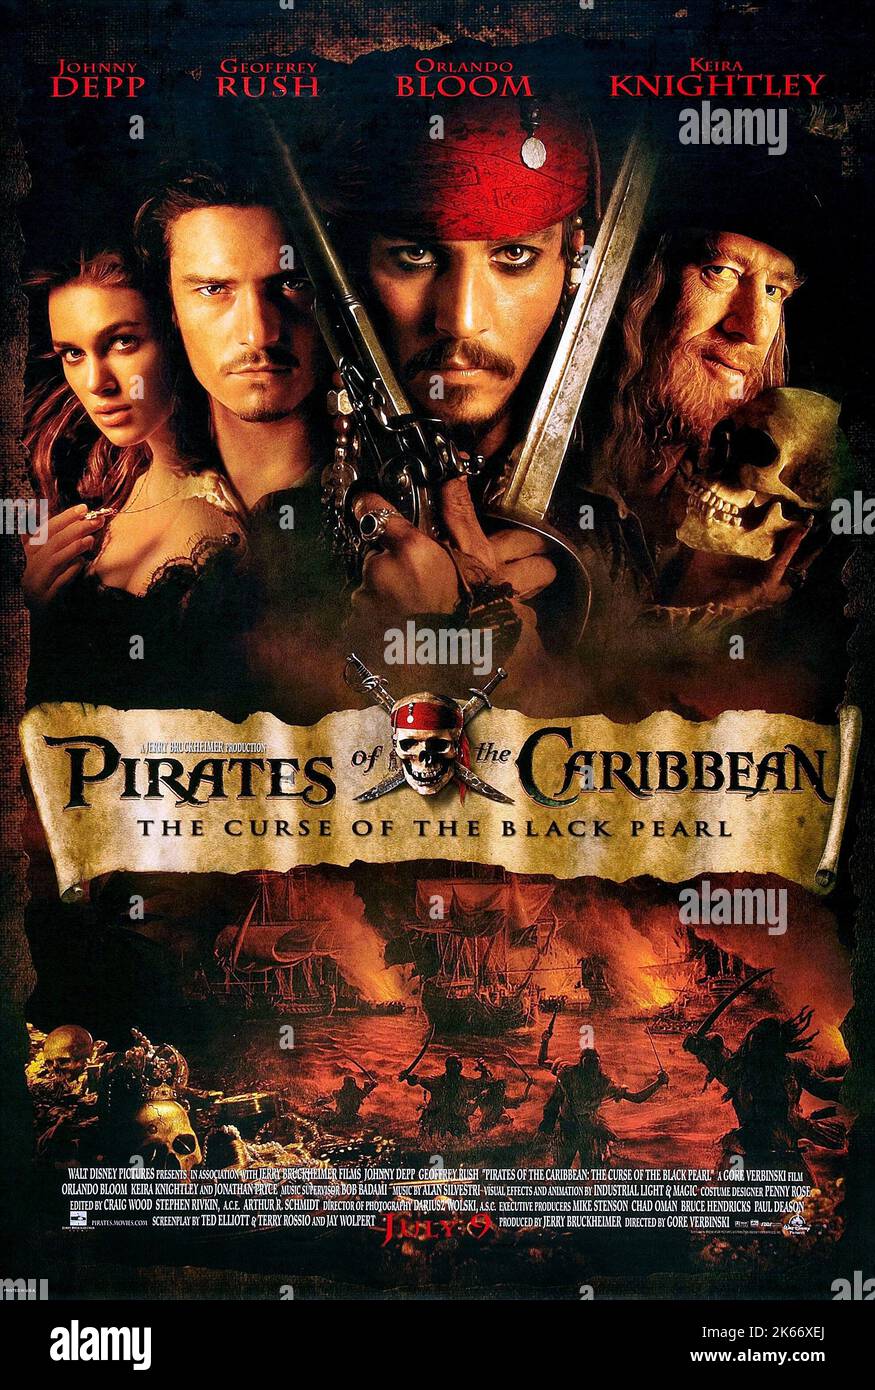 KEIRA KNIGHTLEY, ORLANDO BLOOM, JOHNNY DEPP, GEOFFREY RUSH, PIRATES OF THE CARIBBEAN: THE CURSE OF THE BLACK PEARL, 2003 Stock Photo